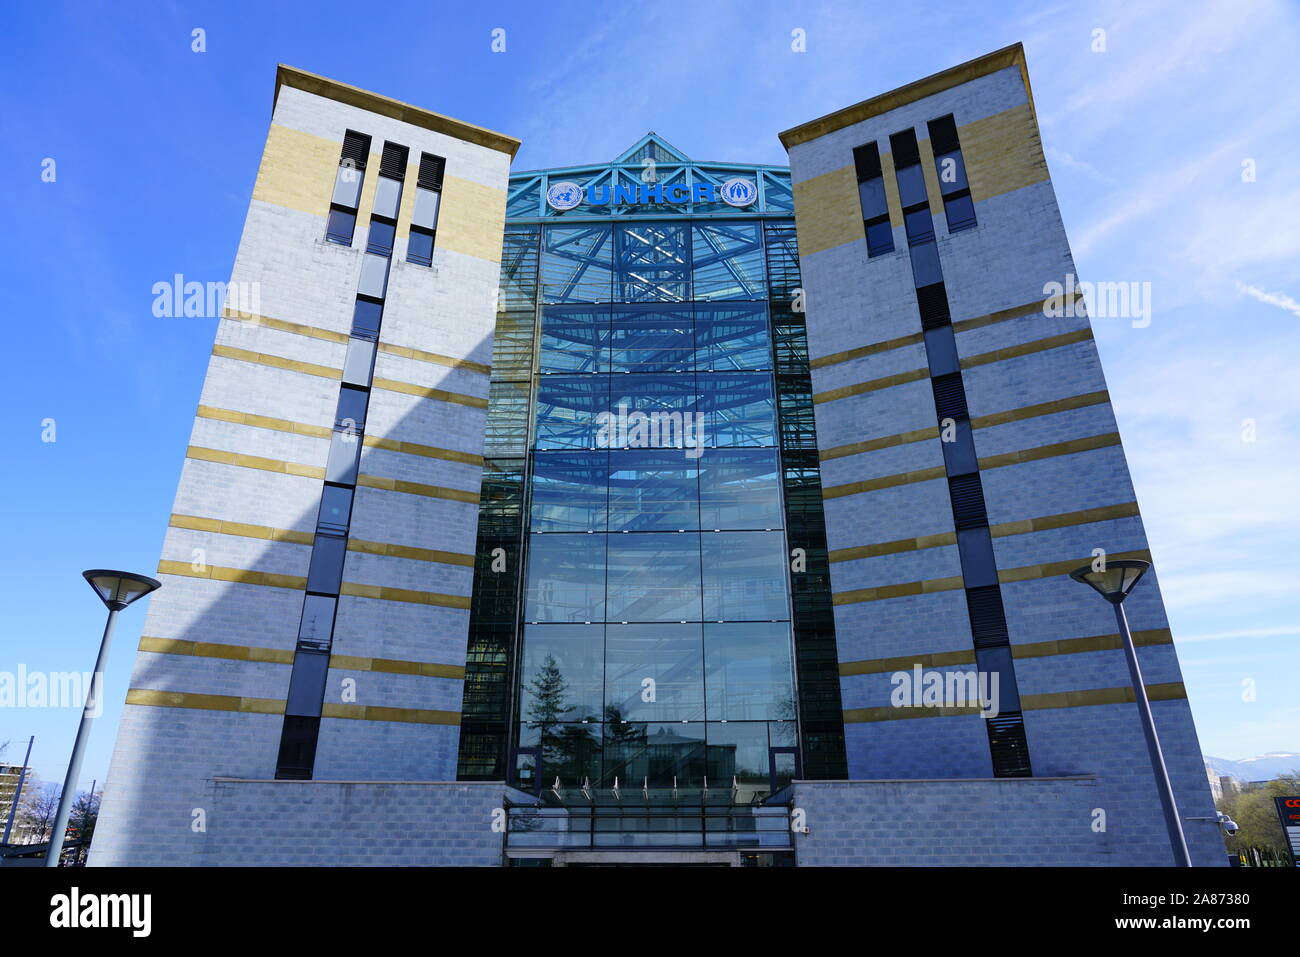 GENEVA, SWITZERLAND -5 APR 2019- Exterior view of the United Nations High Commissioner for Refugees (UNHCR), an international organization located in Stock Photo